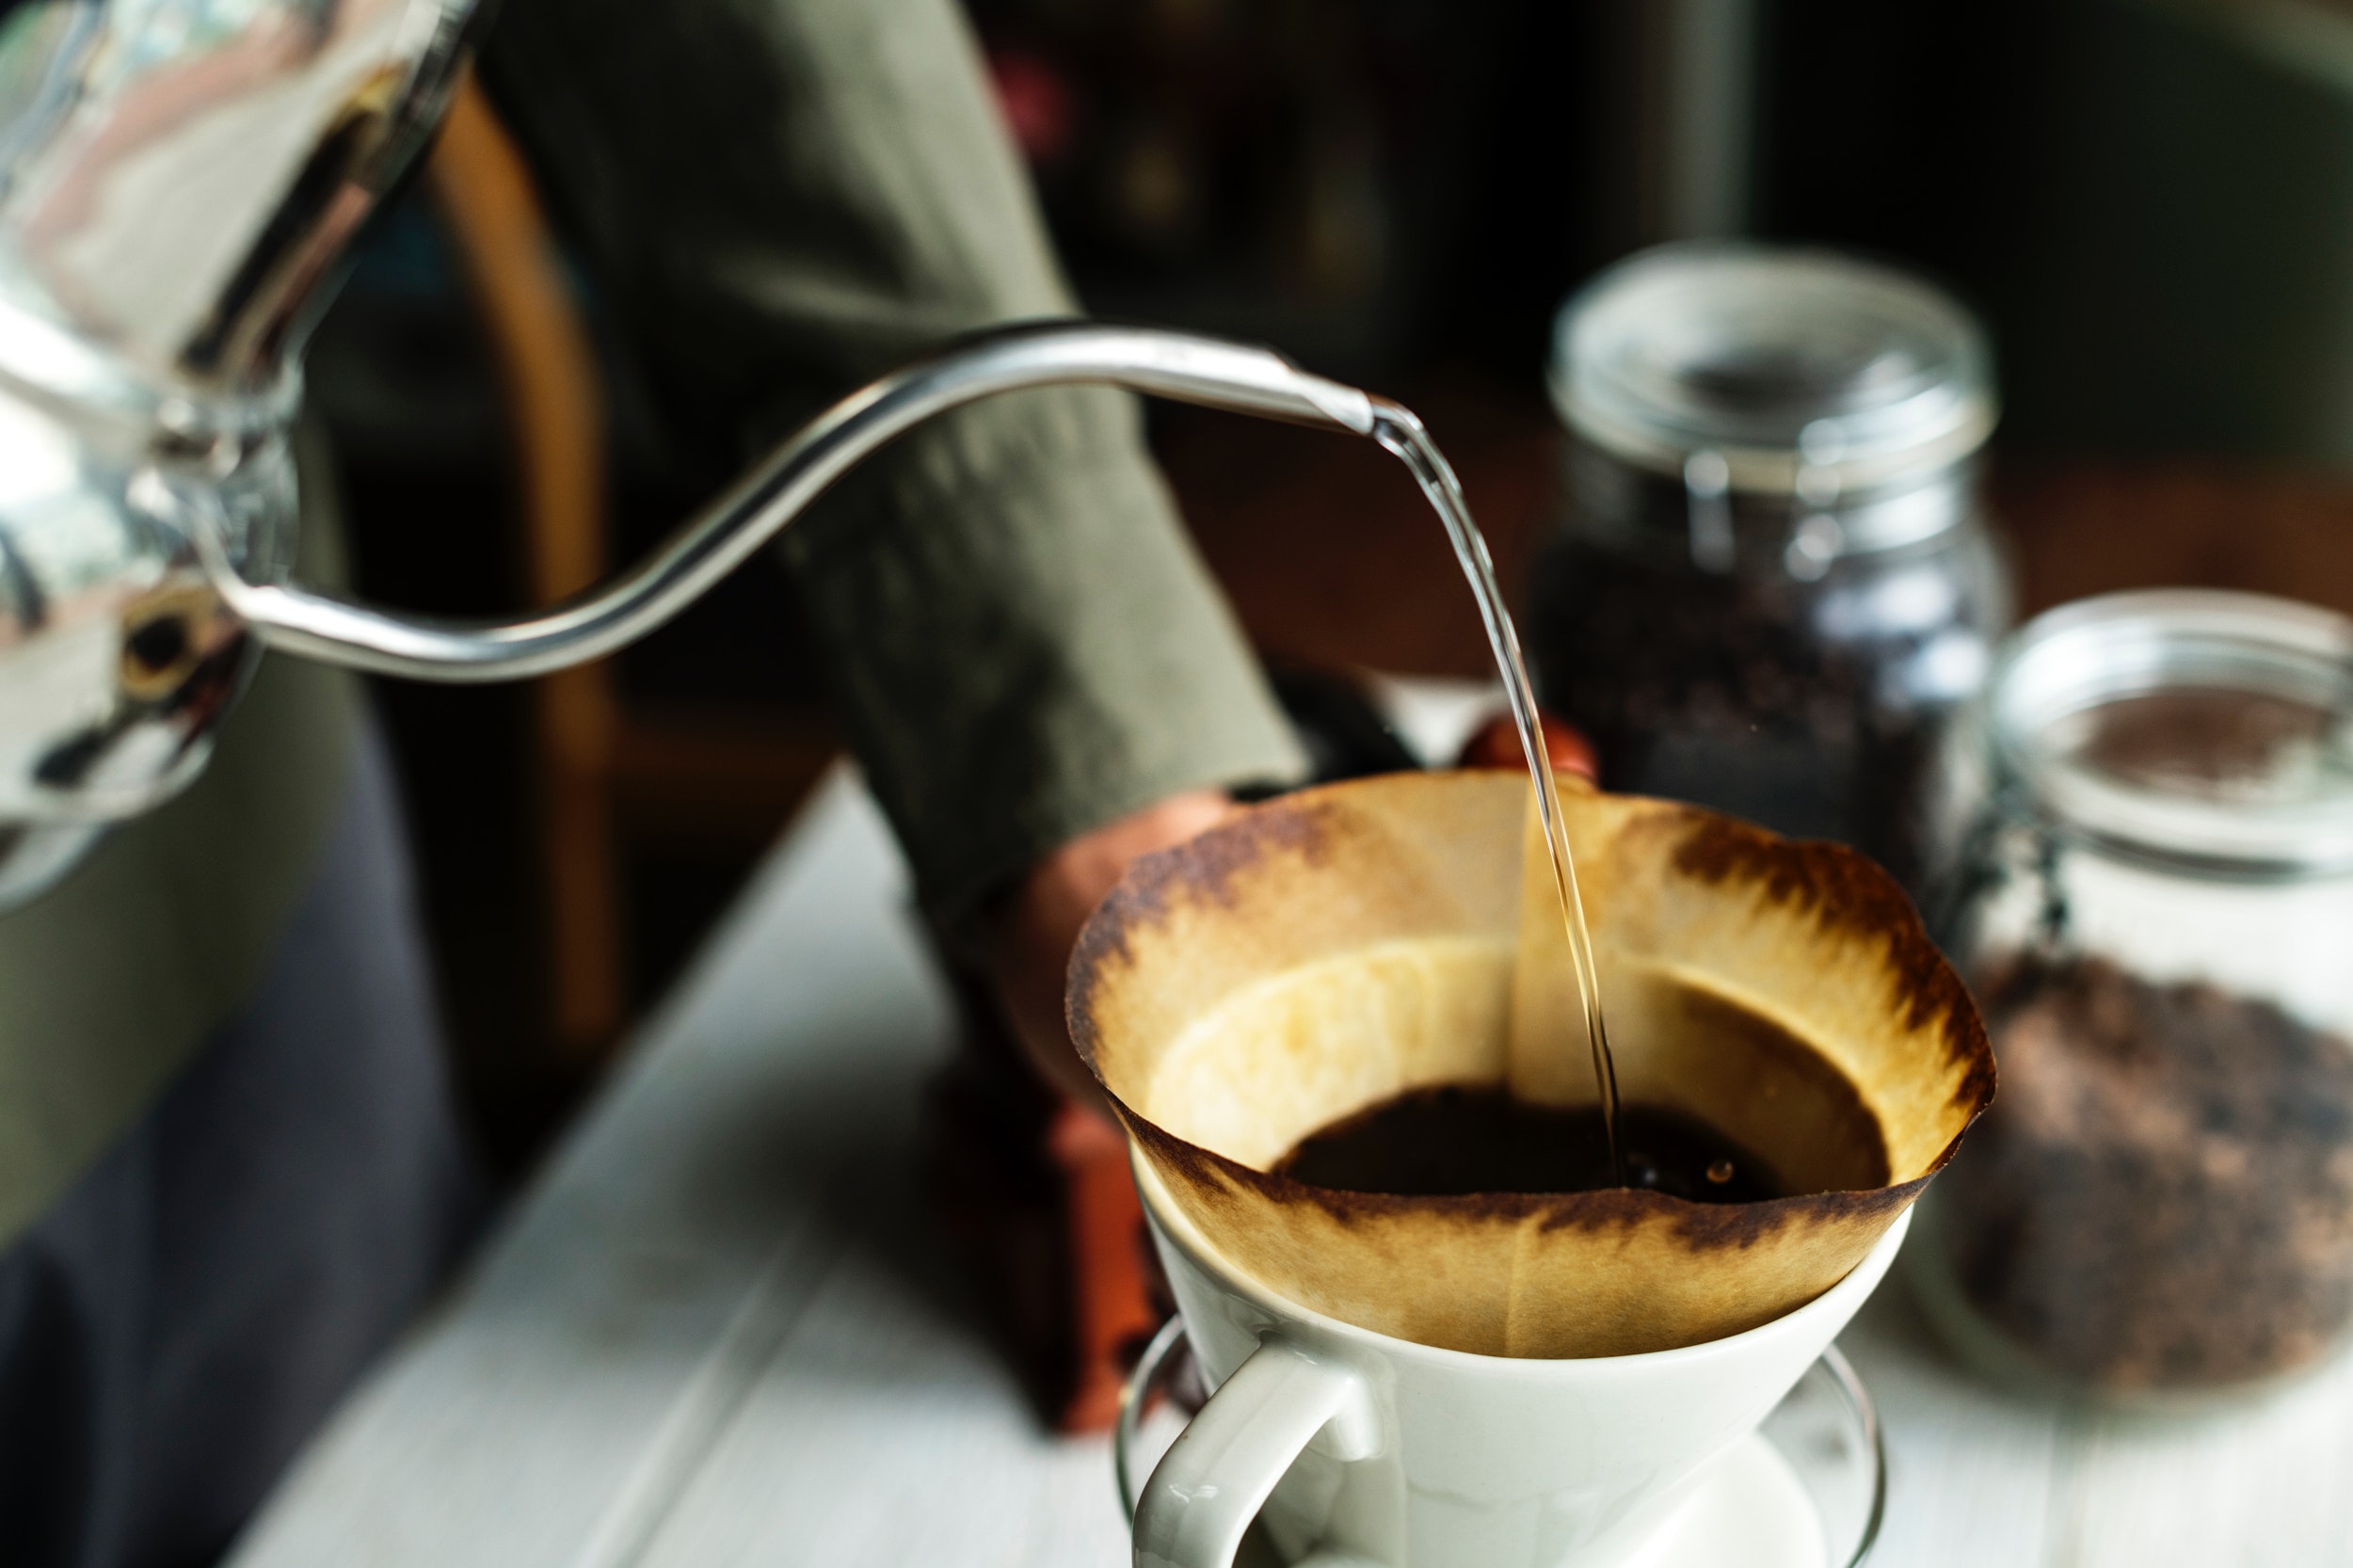 Shallow Focus Photography of Kettle Pouring Water on Coffee Filter, Aroma, Indoors, Focus, Fresh, HQ Photo